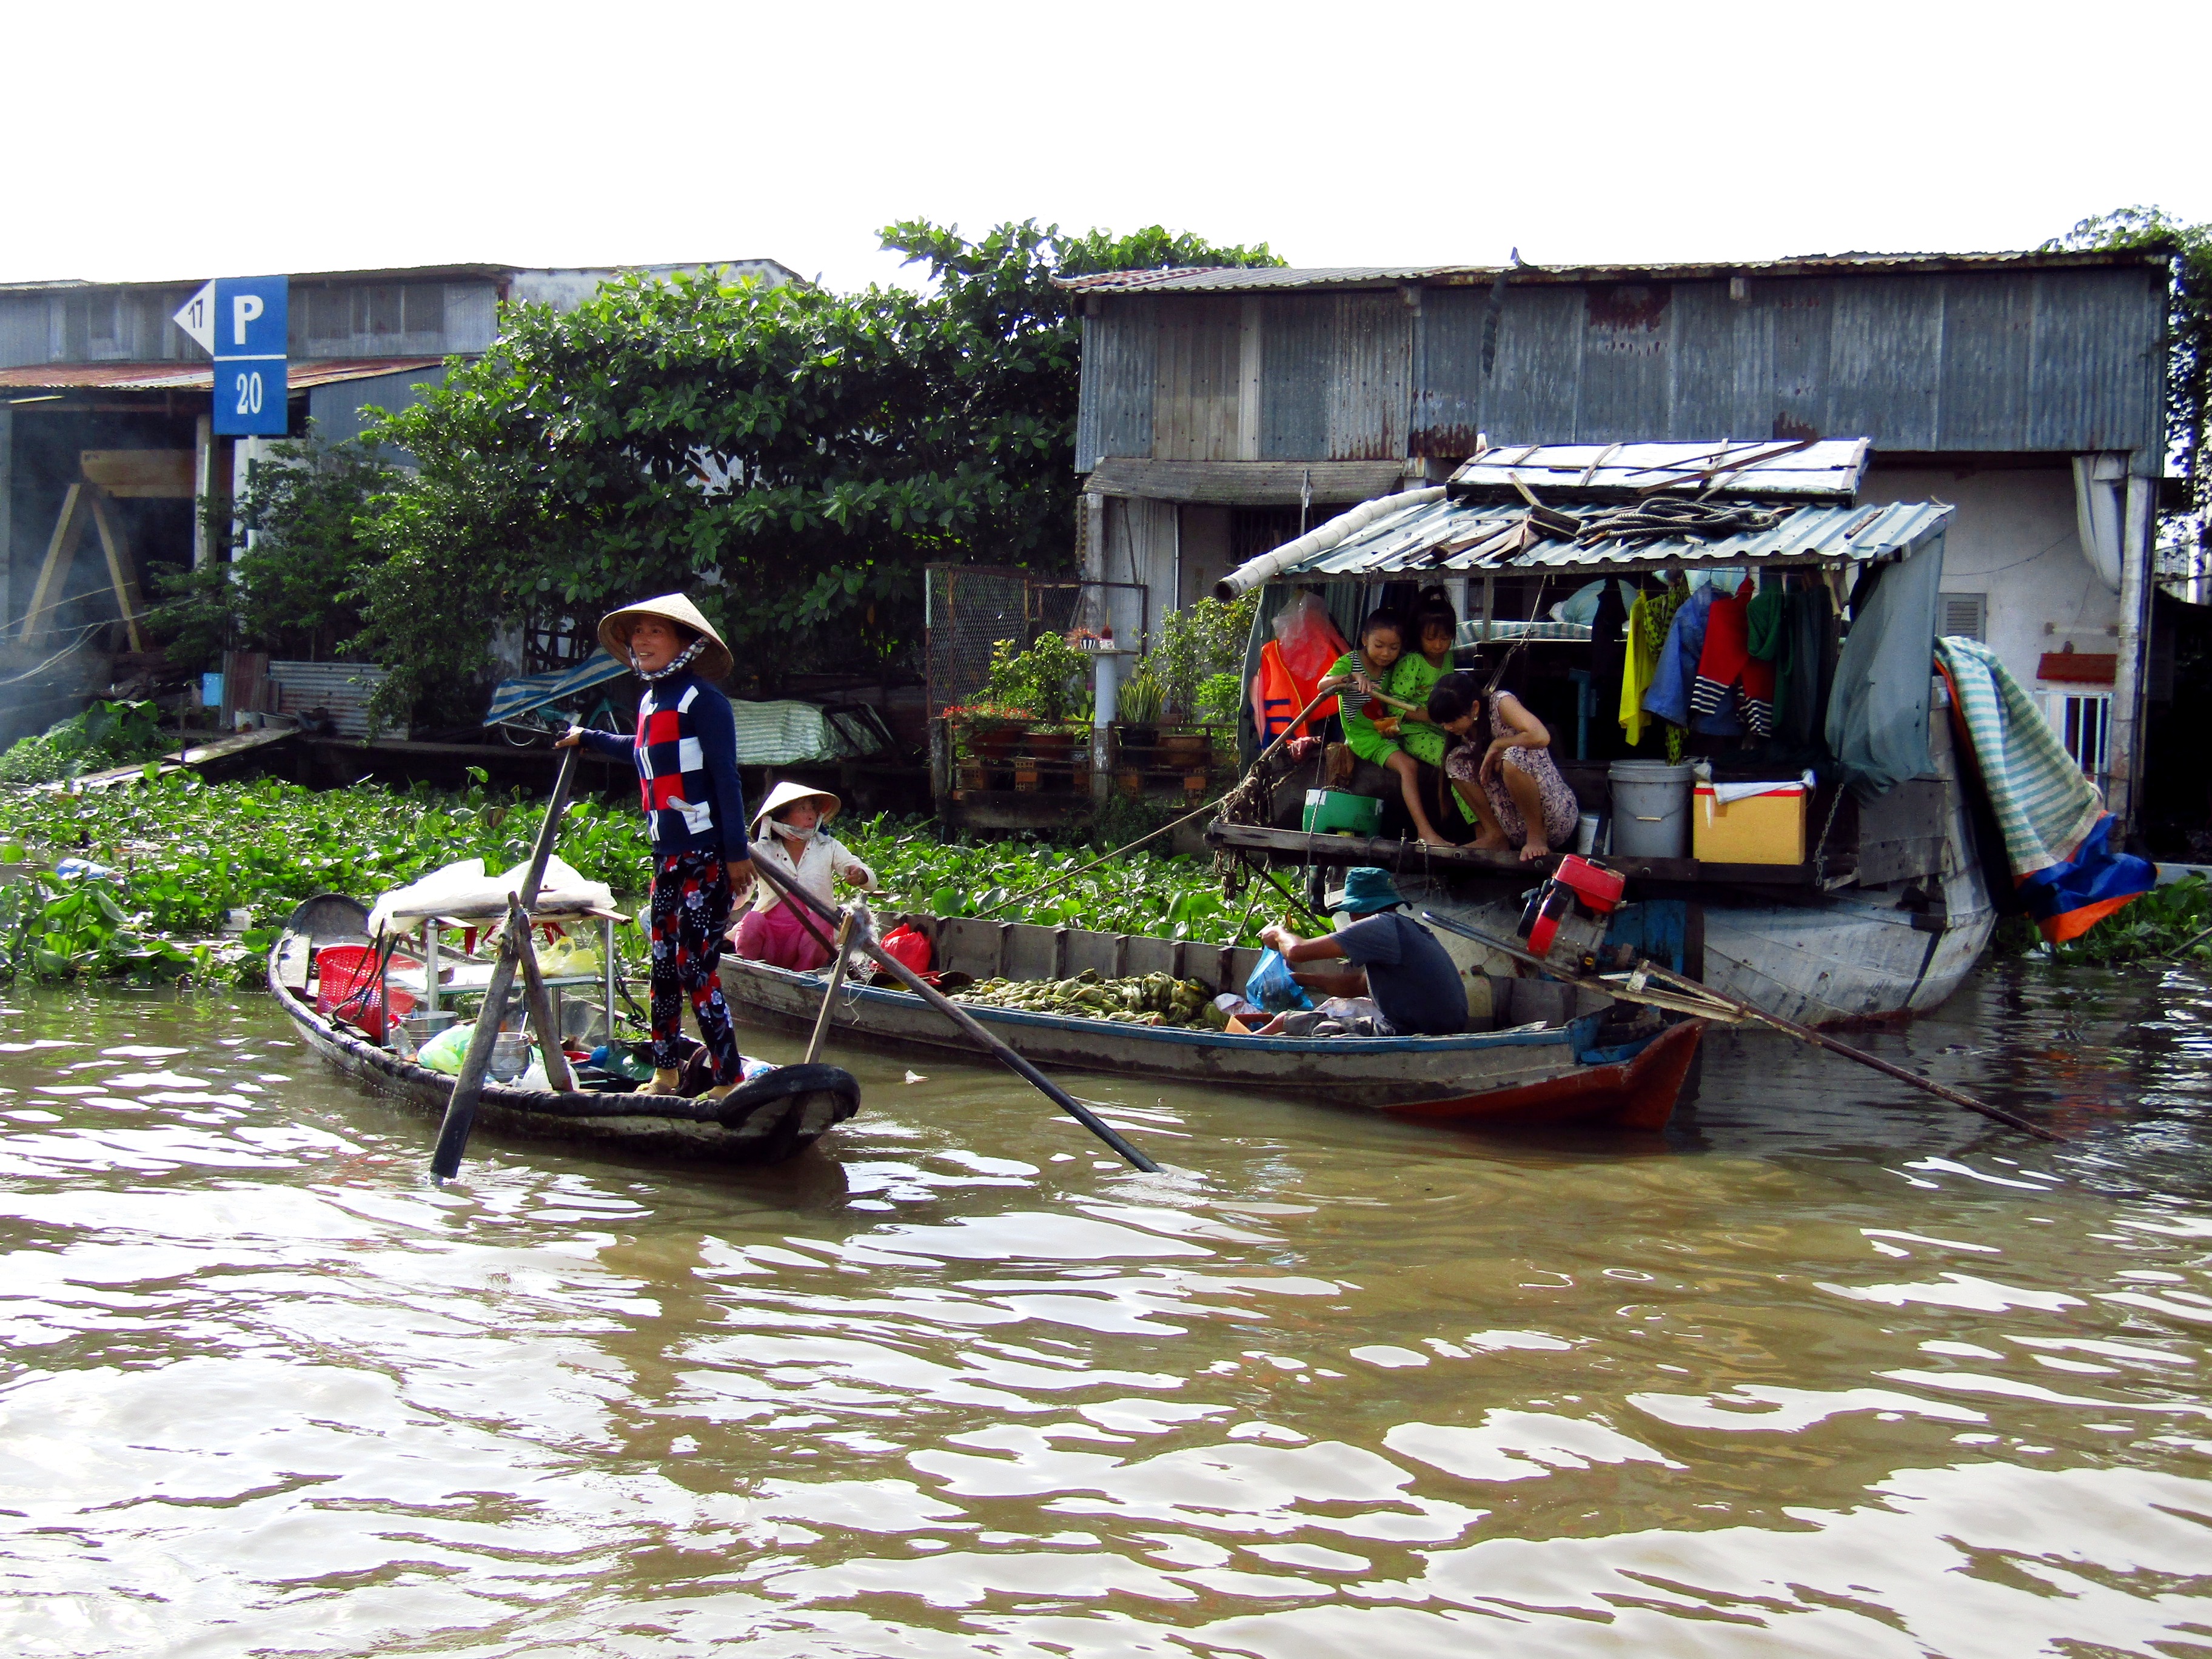 The famous floating markets on the Mekong River